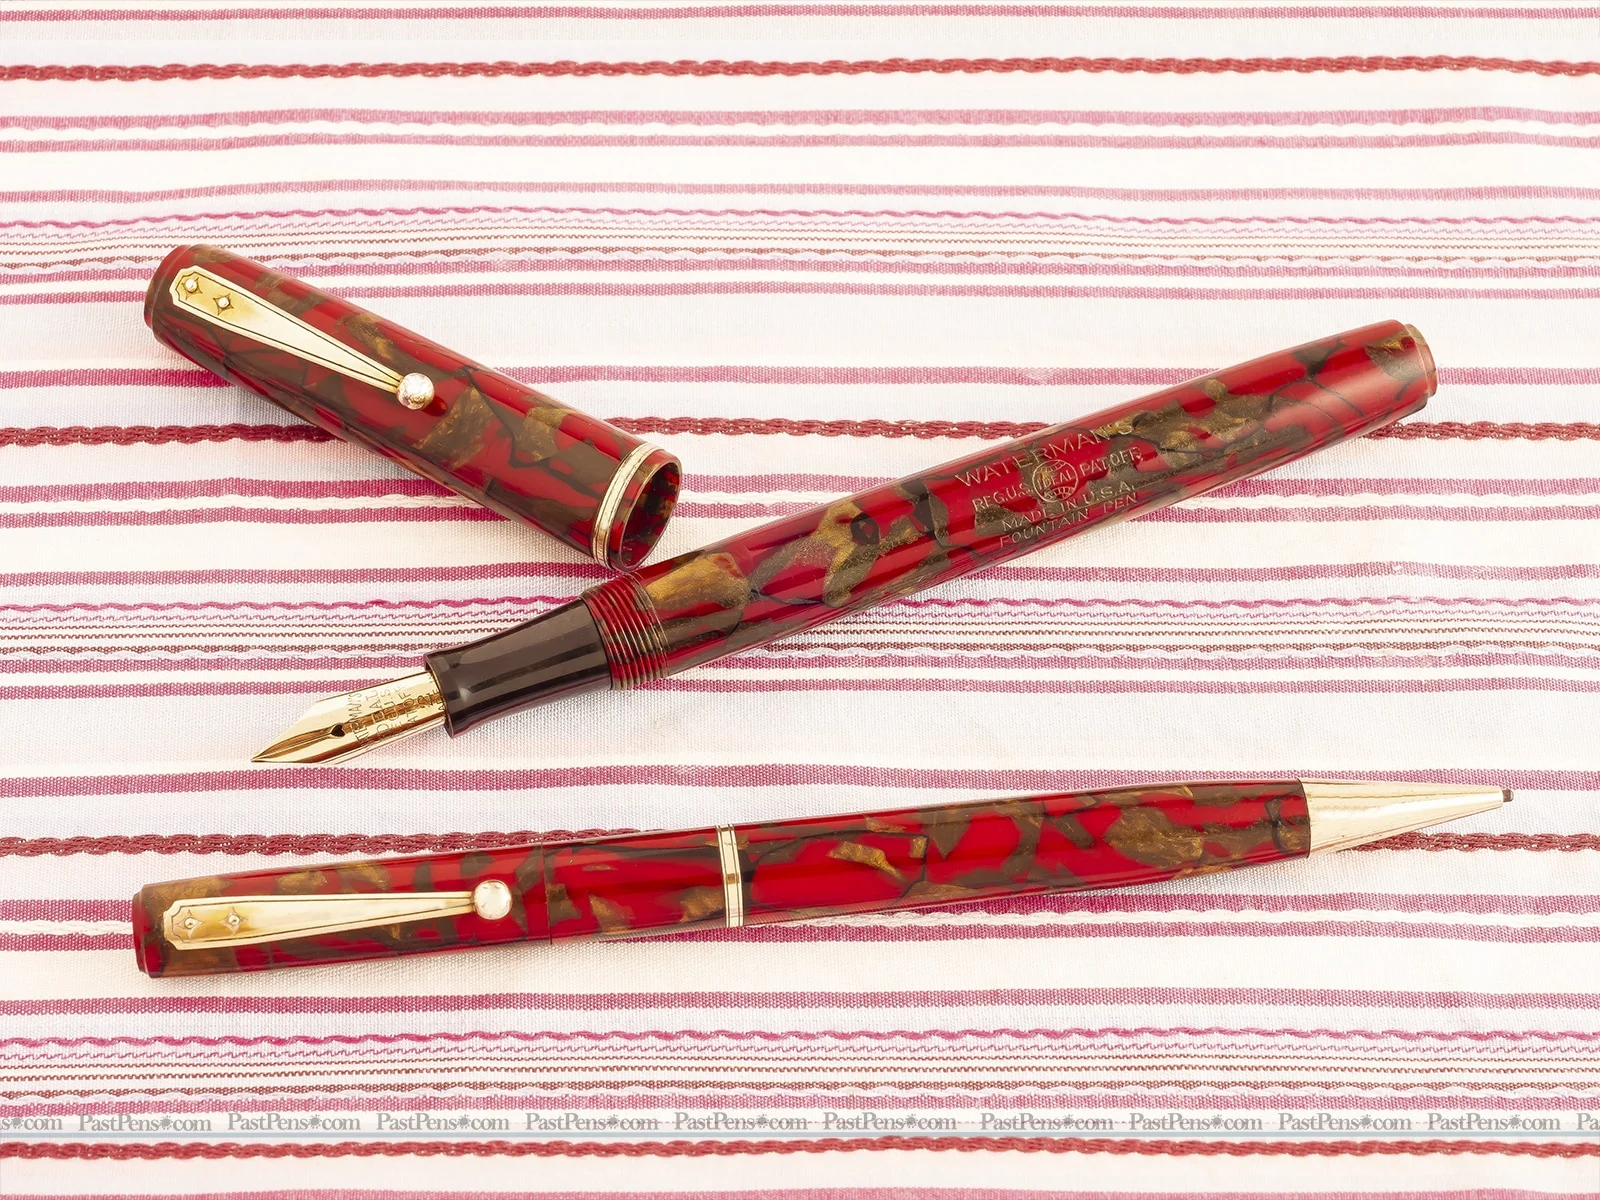 waterman ideal 92 wine red gold marble fountain pen pencil set wm141 vintage 1